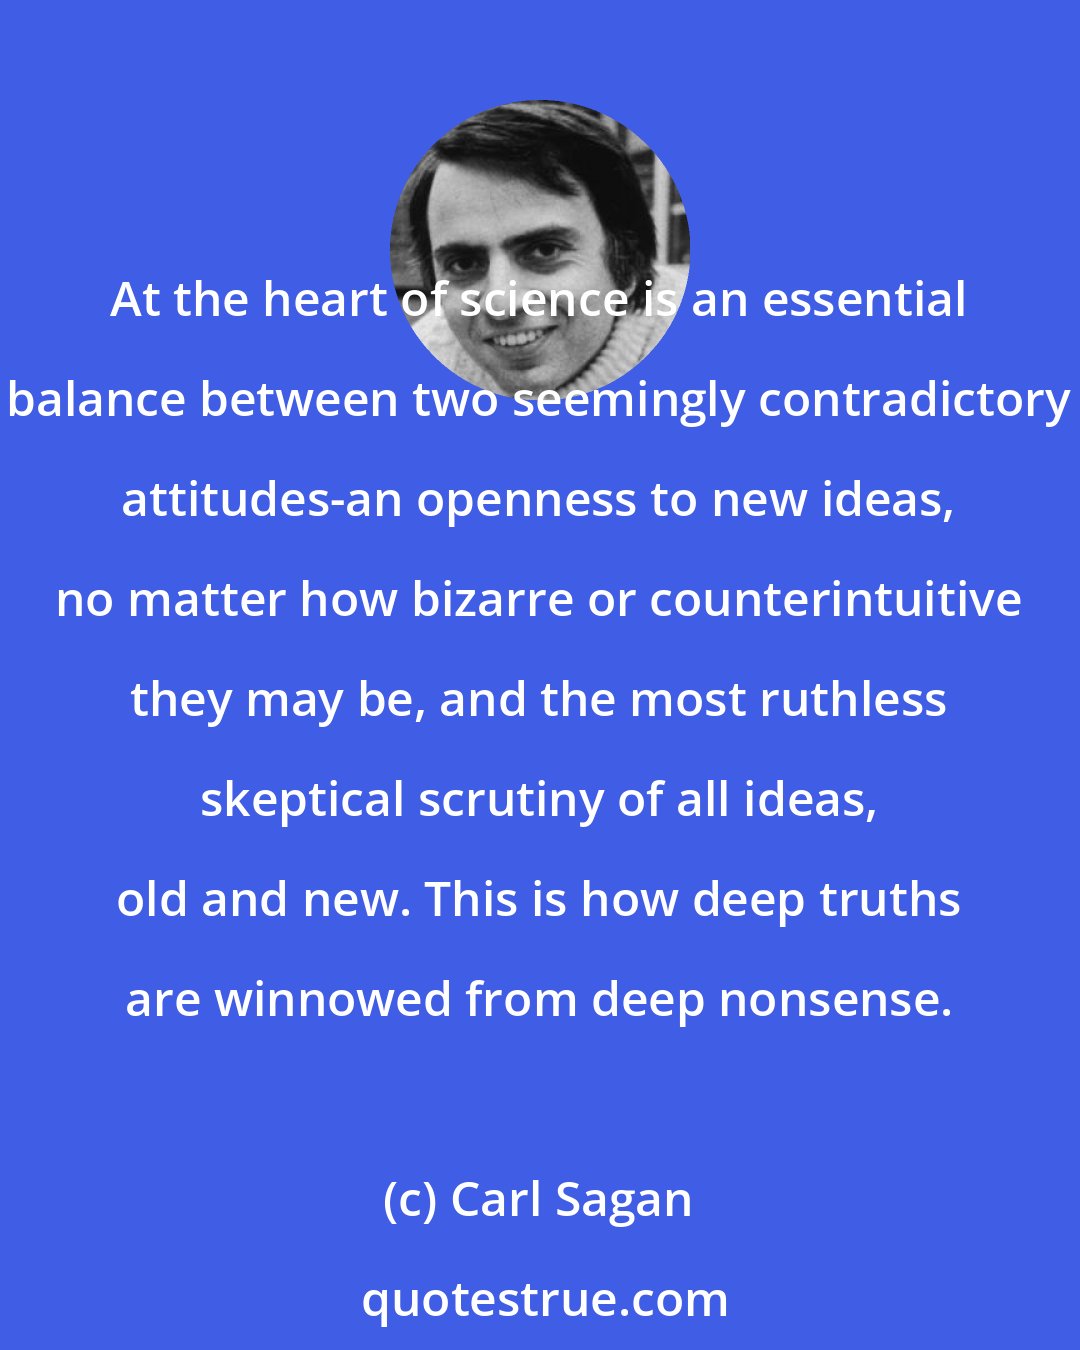 Carl Sagan: At the heart of science is an essential balance between two seemingly contradictory attitudes-an openness to new ideas, no matter how bizarre or counterintuitive they may be, and the most ruthless skeptical scrutiny of all ideas, old and new. This is how deep truths are winnowed from deep nonsense.